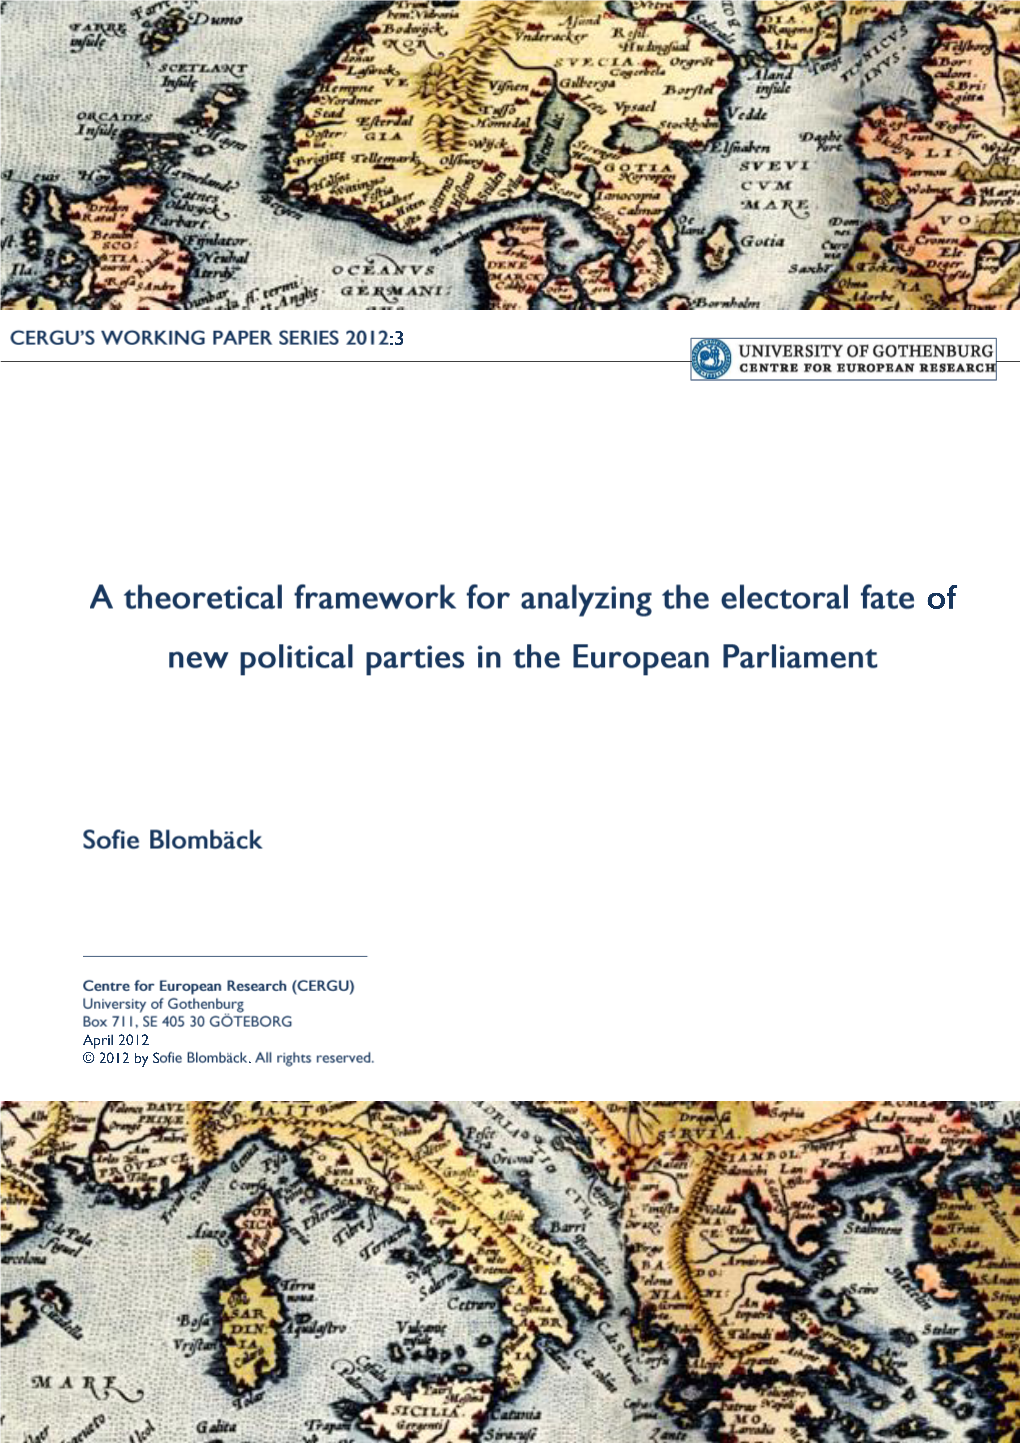 A Theoretical Framework for Analyzing the Electoral Fate of New Political Parties in the European Parliament